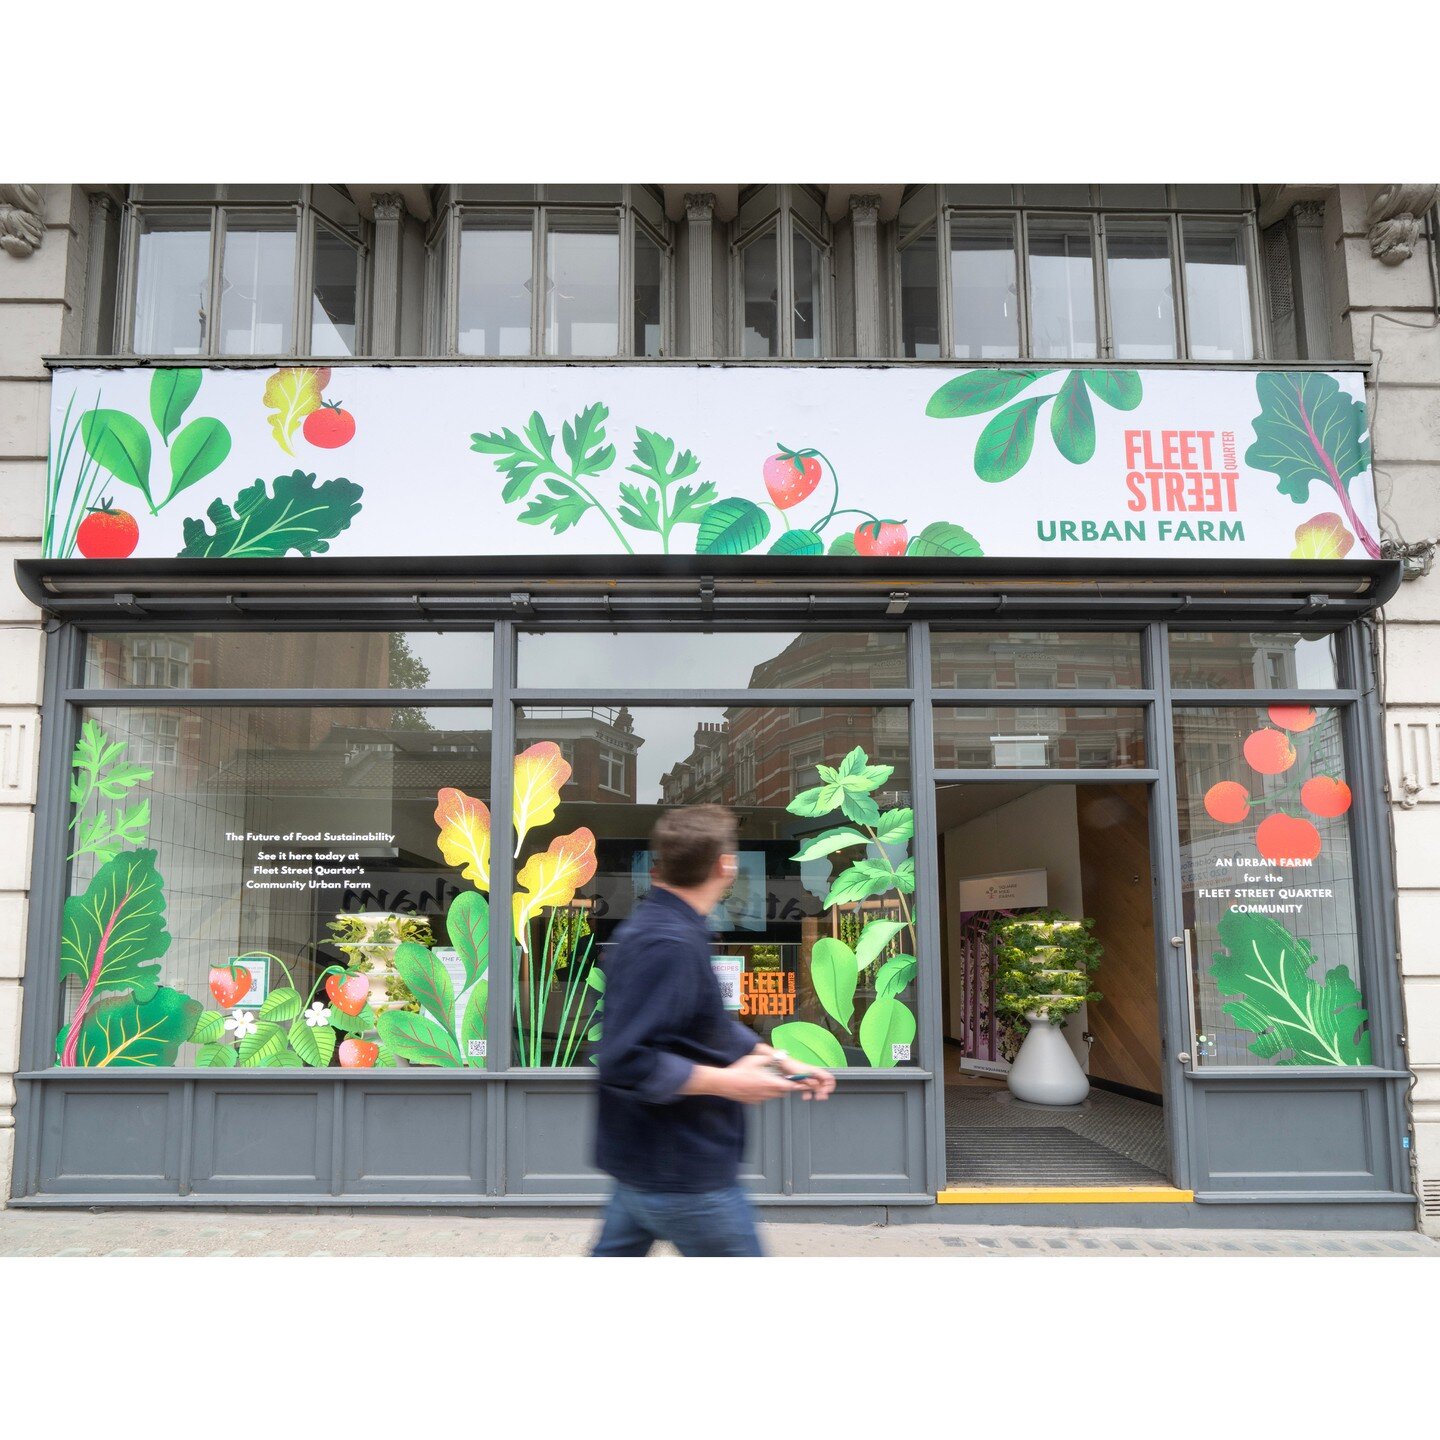 To coincide with @ecocitysummit
at the Barbican @squaremilefarms have a pop-up Urban Farm this month running workshops, talks, harvests and cooking lessons at 109 Fleet Street.

I had the pleasure of designing these herby fruity vinyls for the window